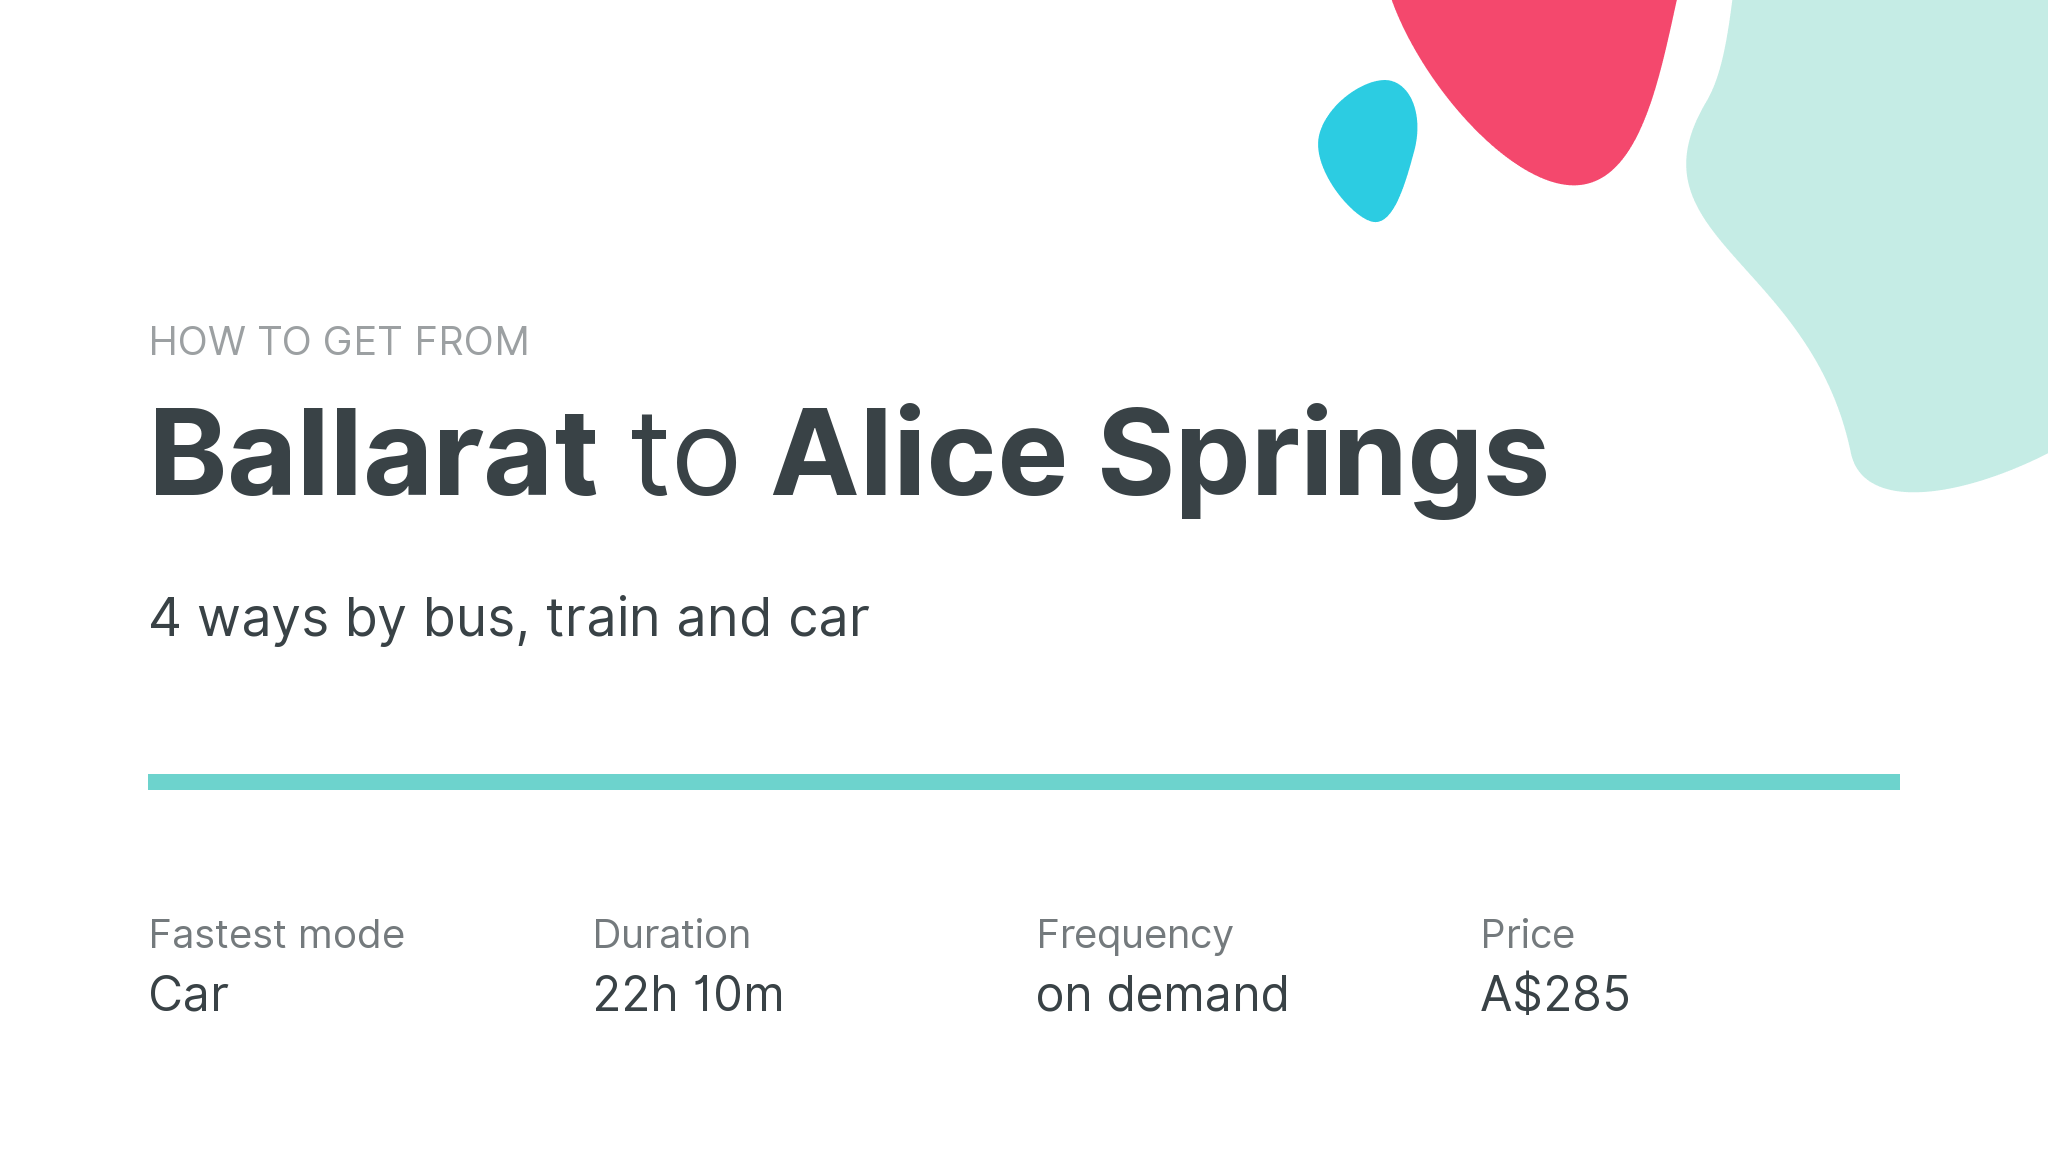 How do I get from Ballarat to Alice Springs